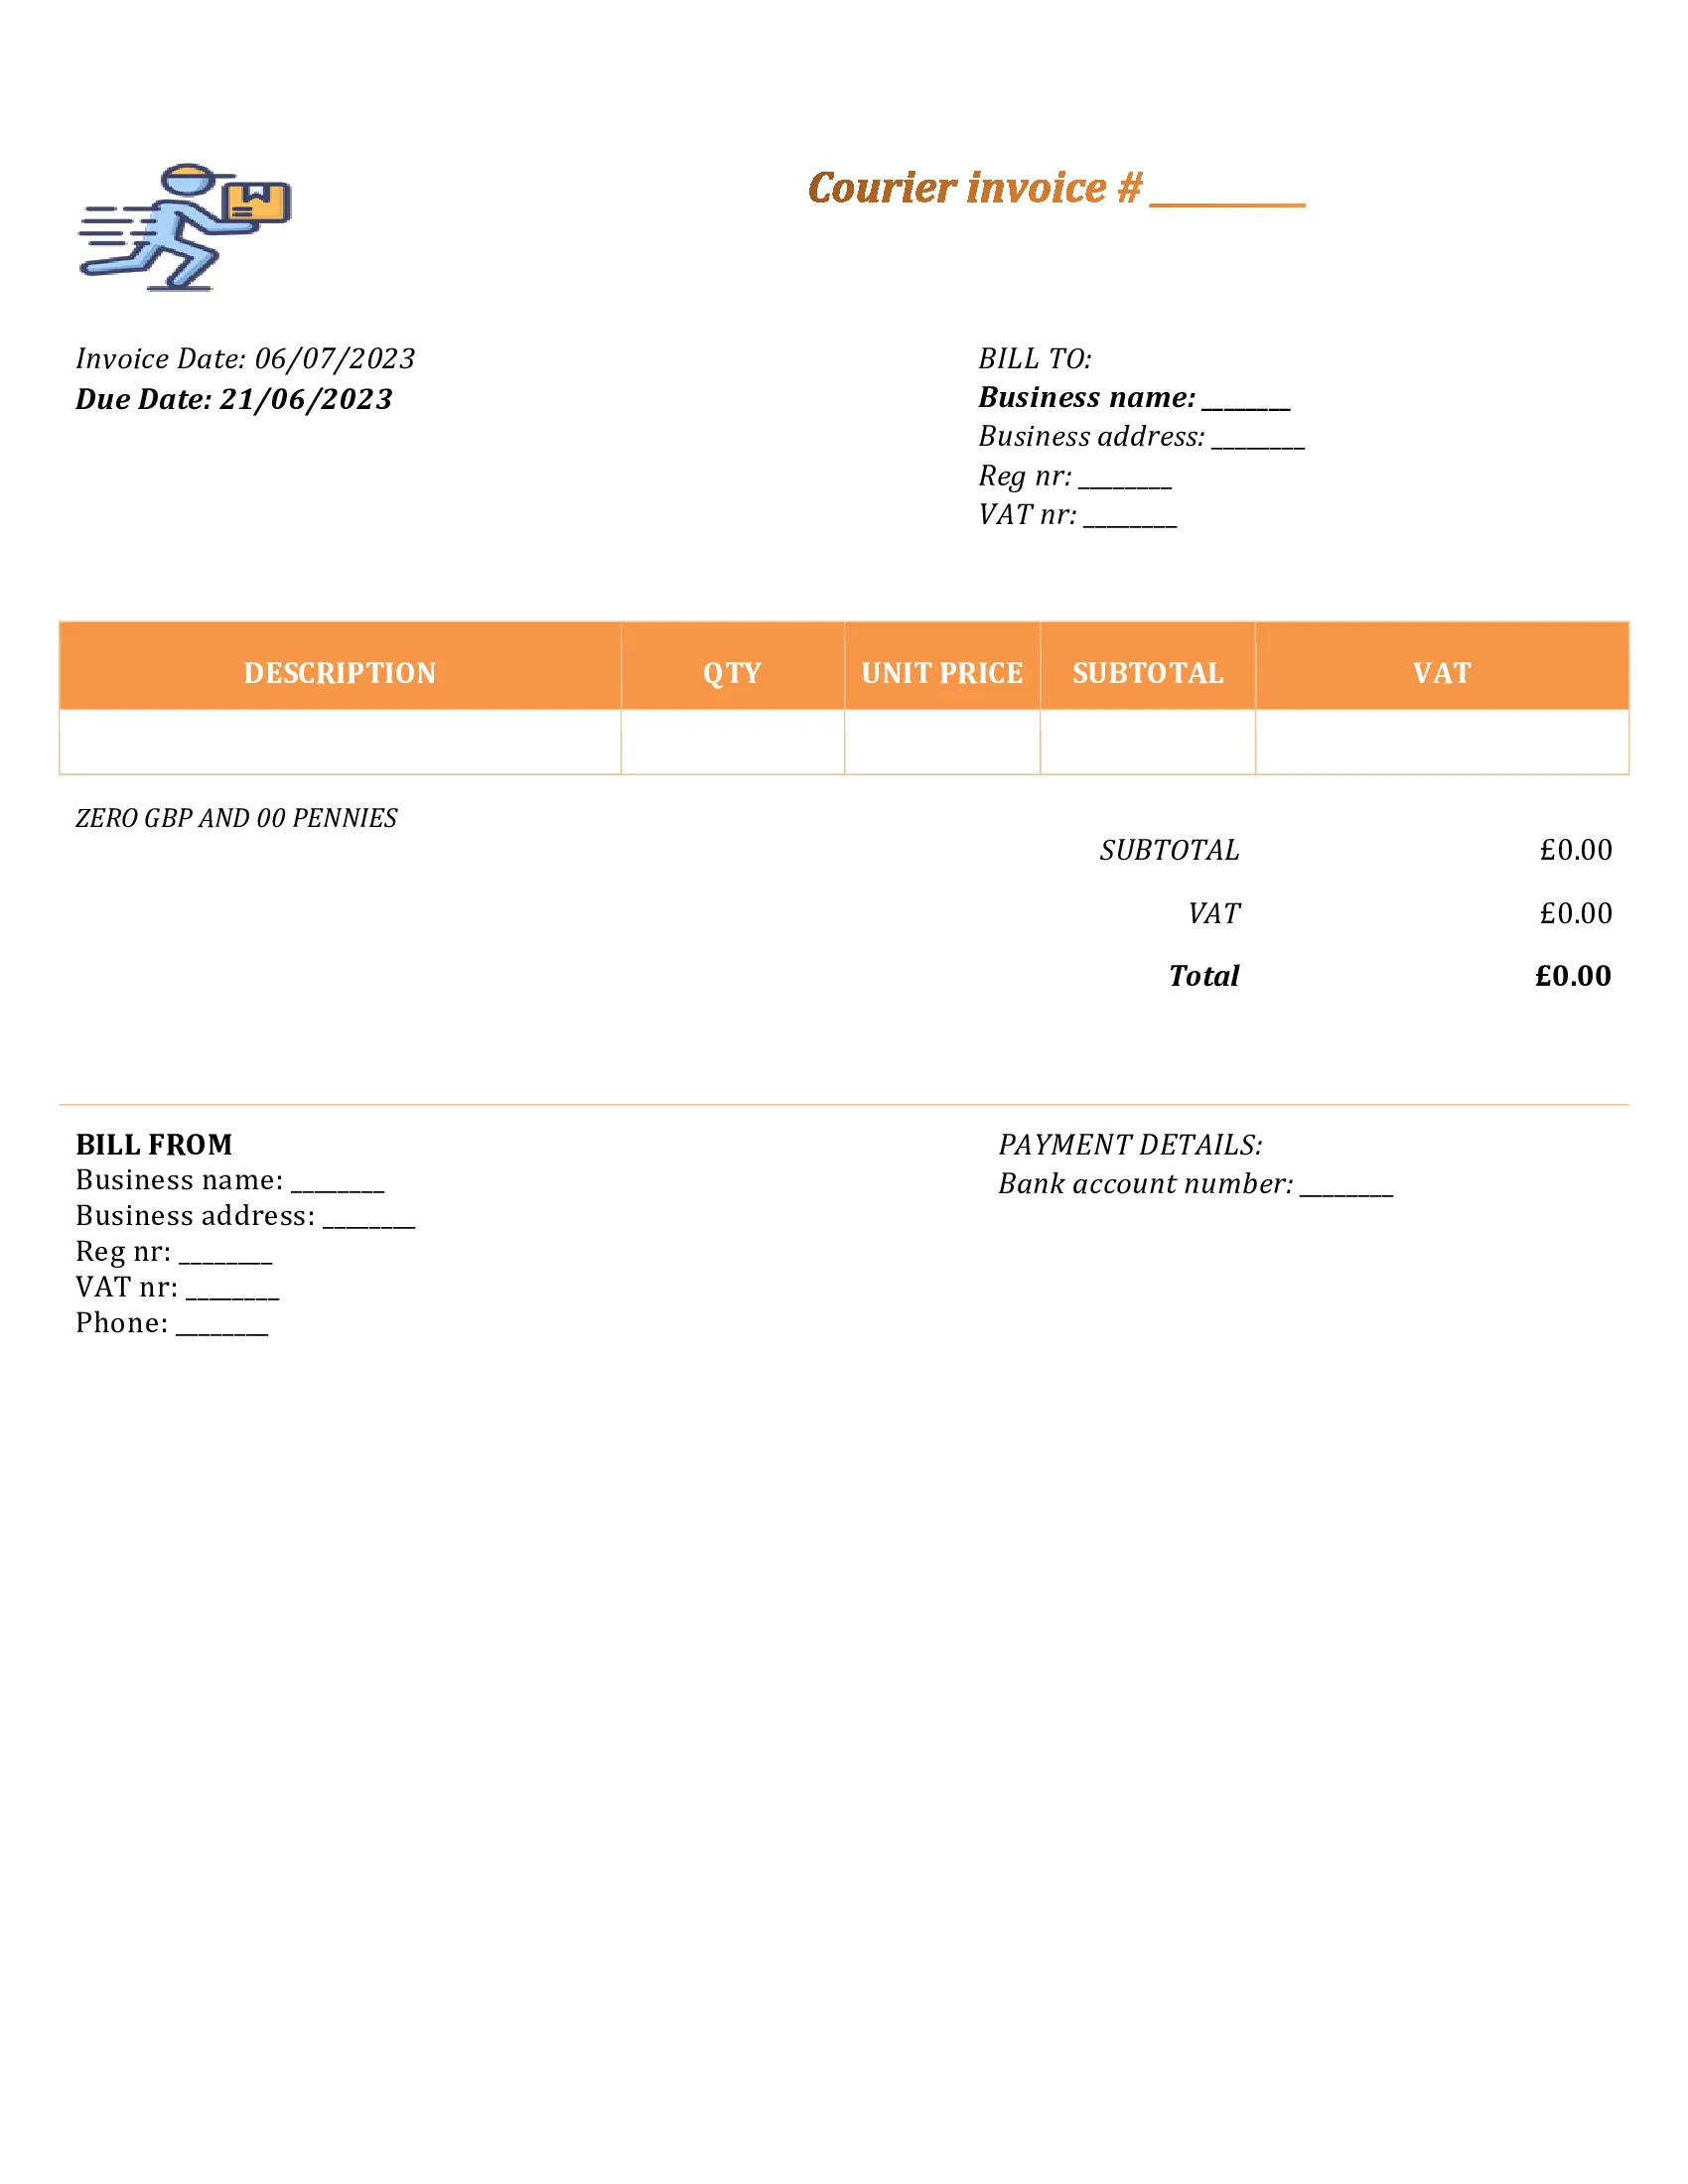 personal courier invoice template UK Word / Google docs